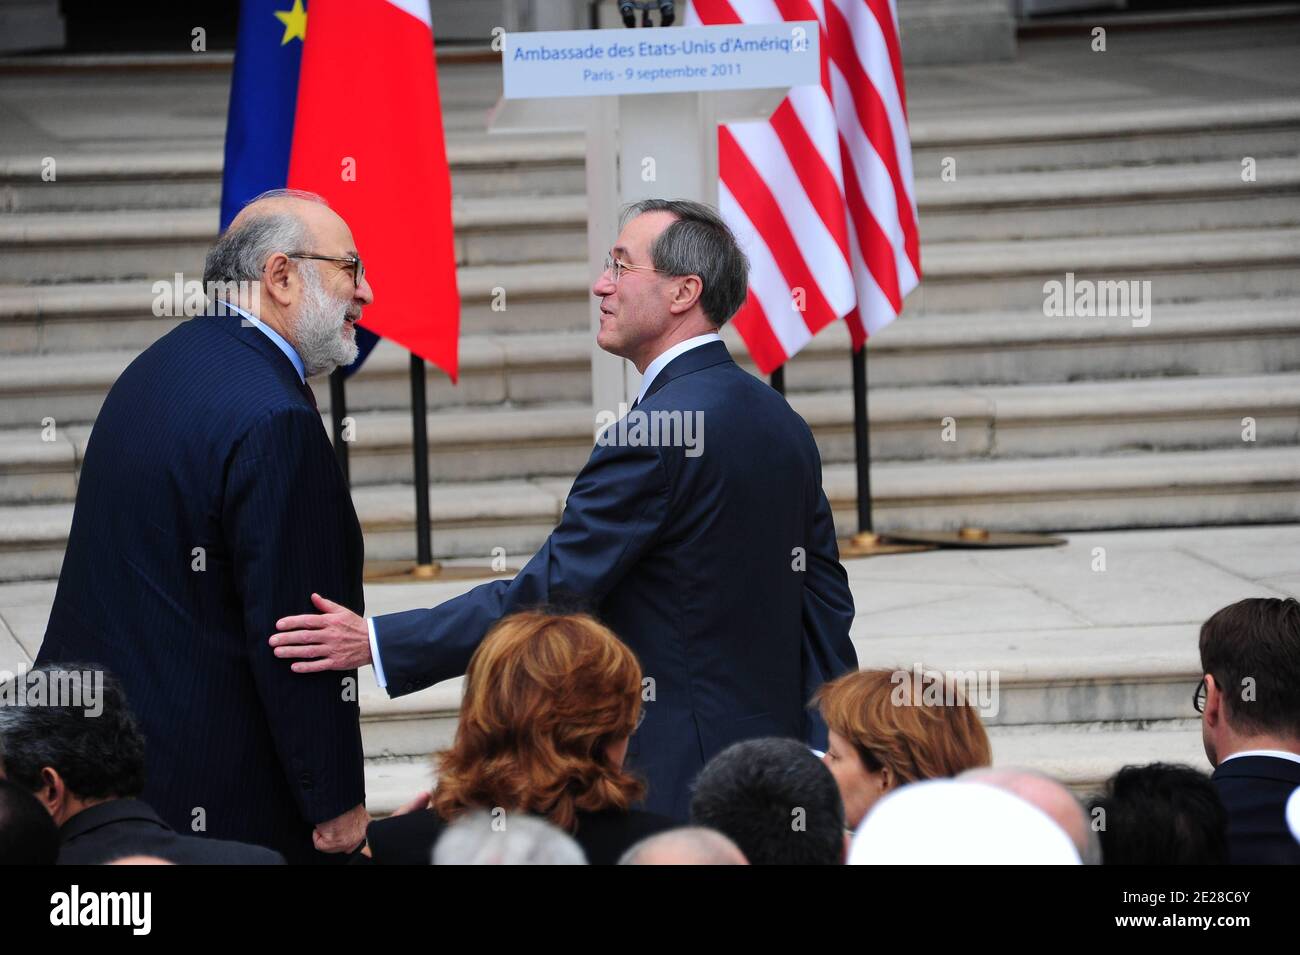 French Interior Minister Claude Gueant is pictured during the celebration of 10th Anniversary of the September 11 at US Embassy in Paris, France on September 9, 2011. Photo by Mousse/ABACAPRESS.COM Stock Photo